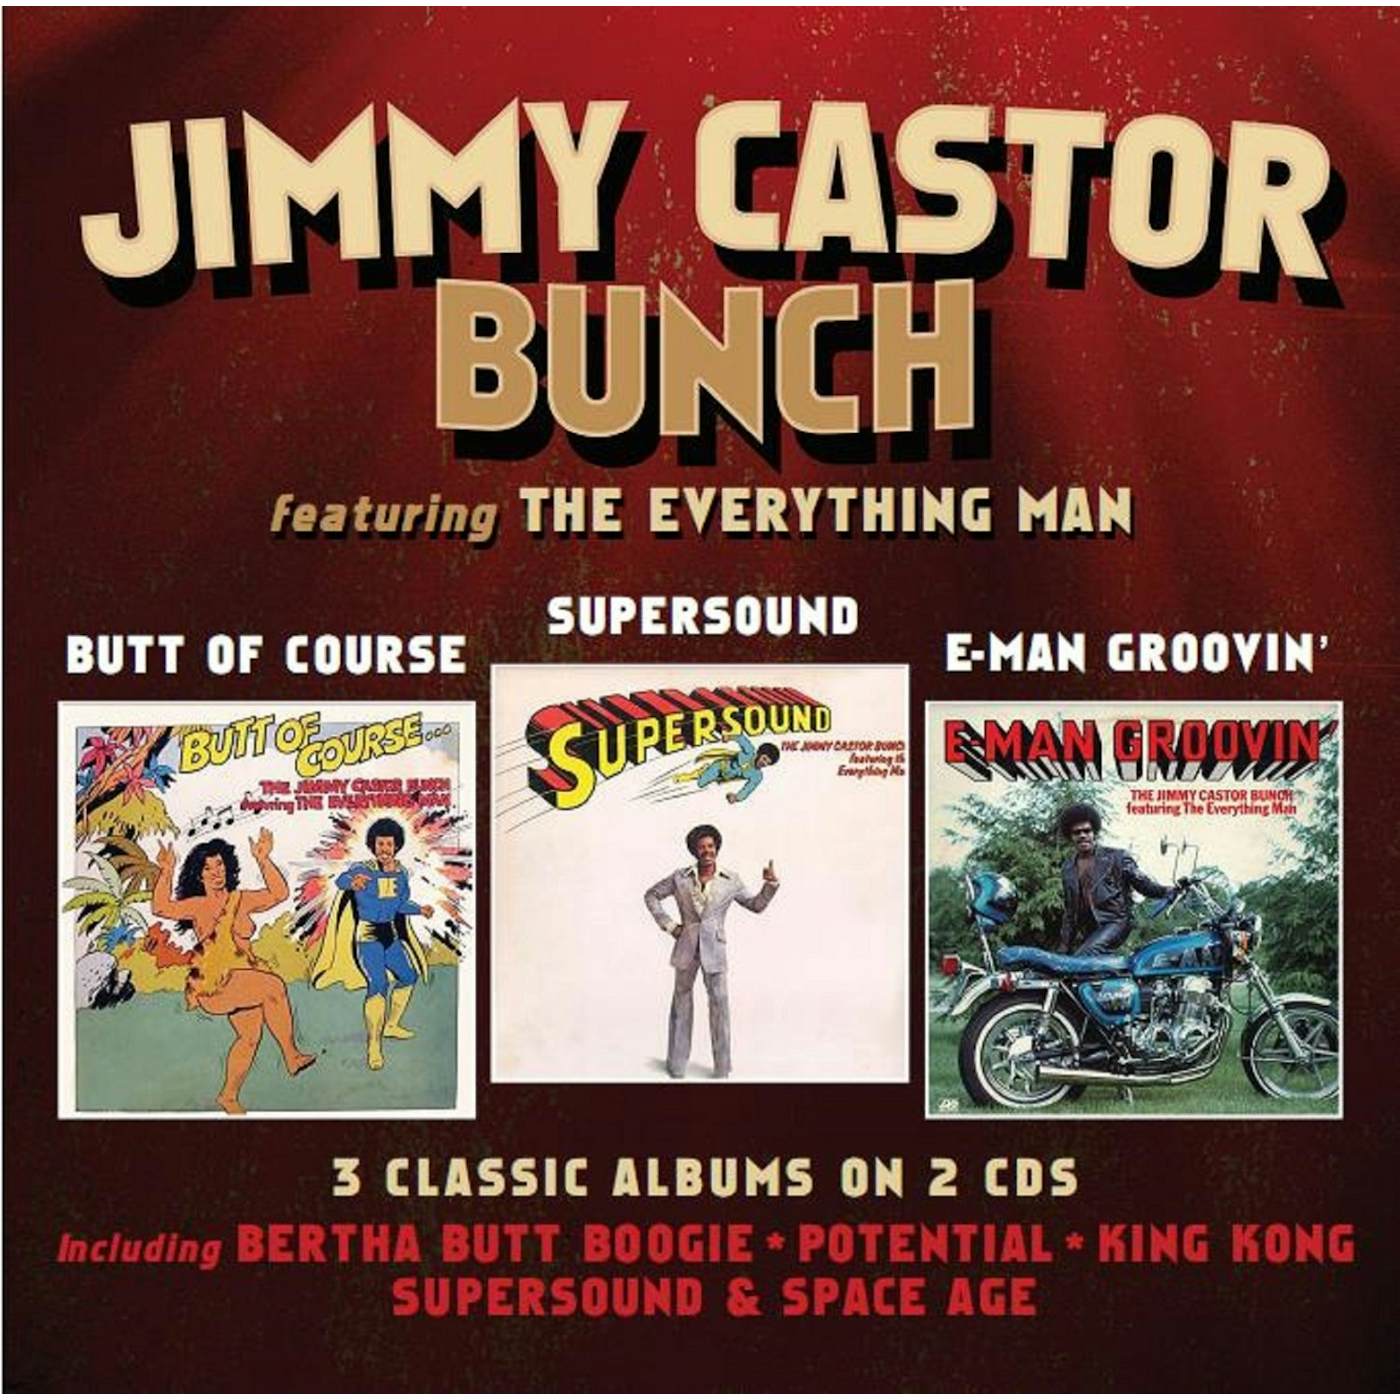 The Jimmy Castor Bunch BUTT OF COURSE / SUPERSOUND / E-MAN GROOVIN CD